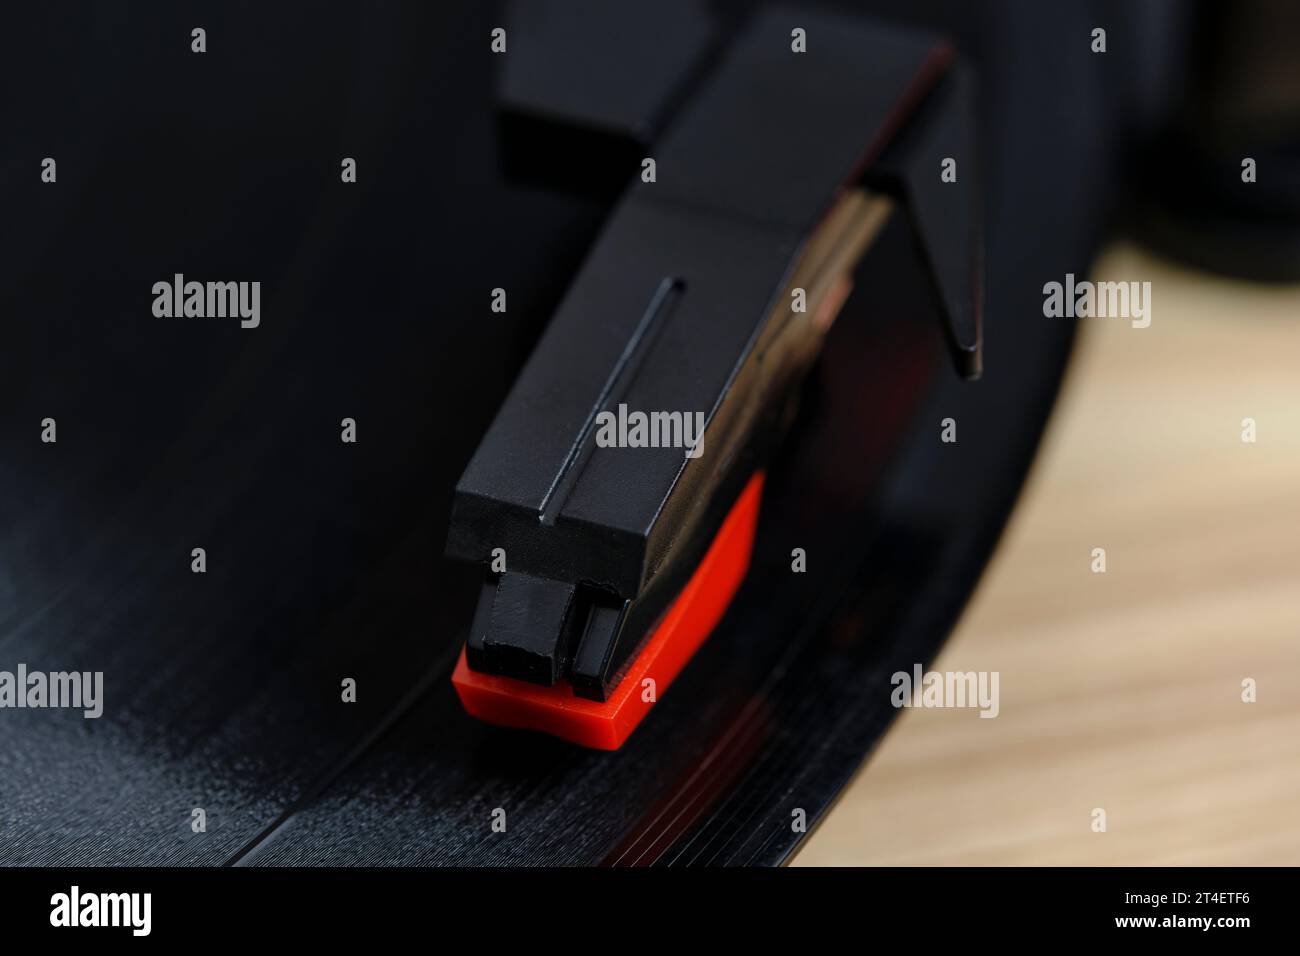 Black vinyl record and needle for playing music from vinyl top view Stock Photo